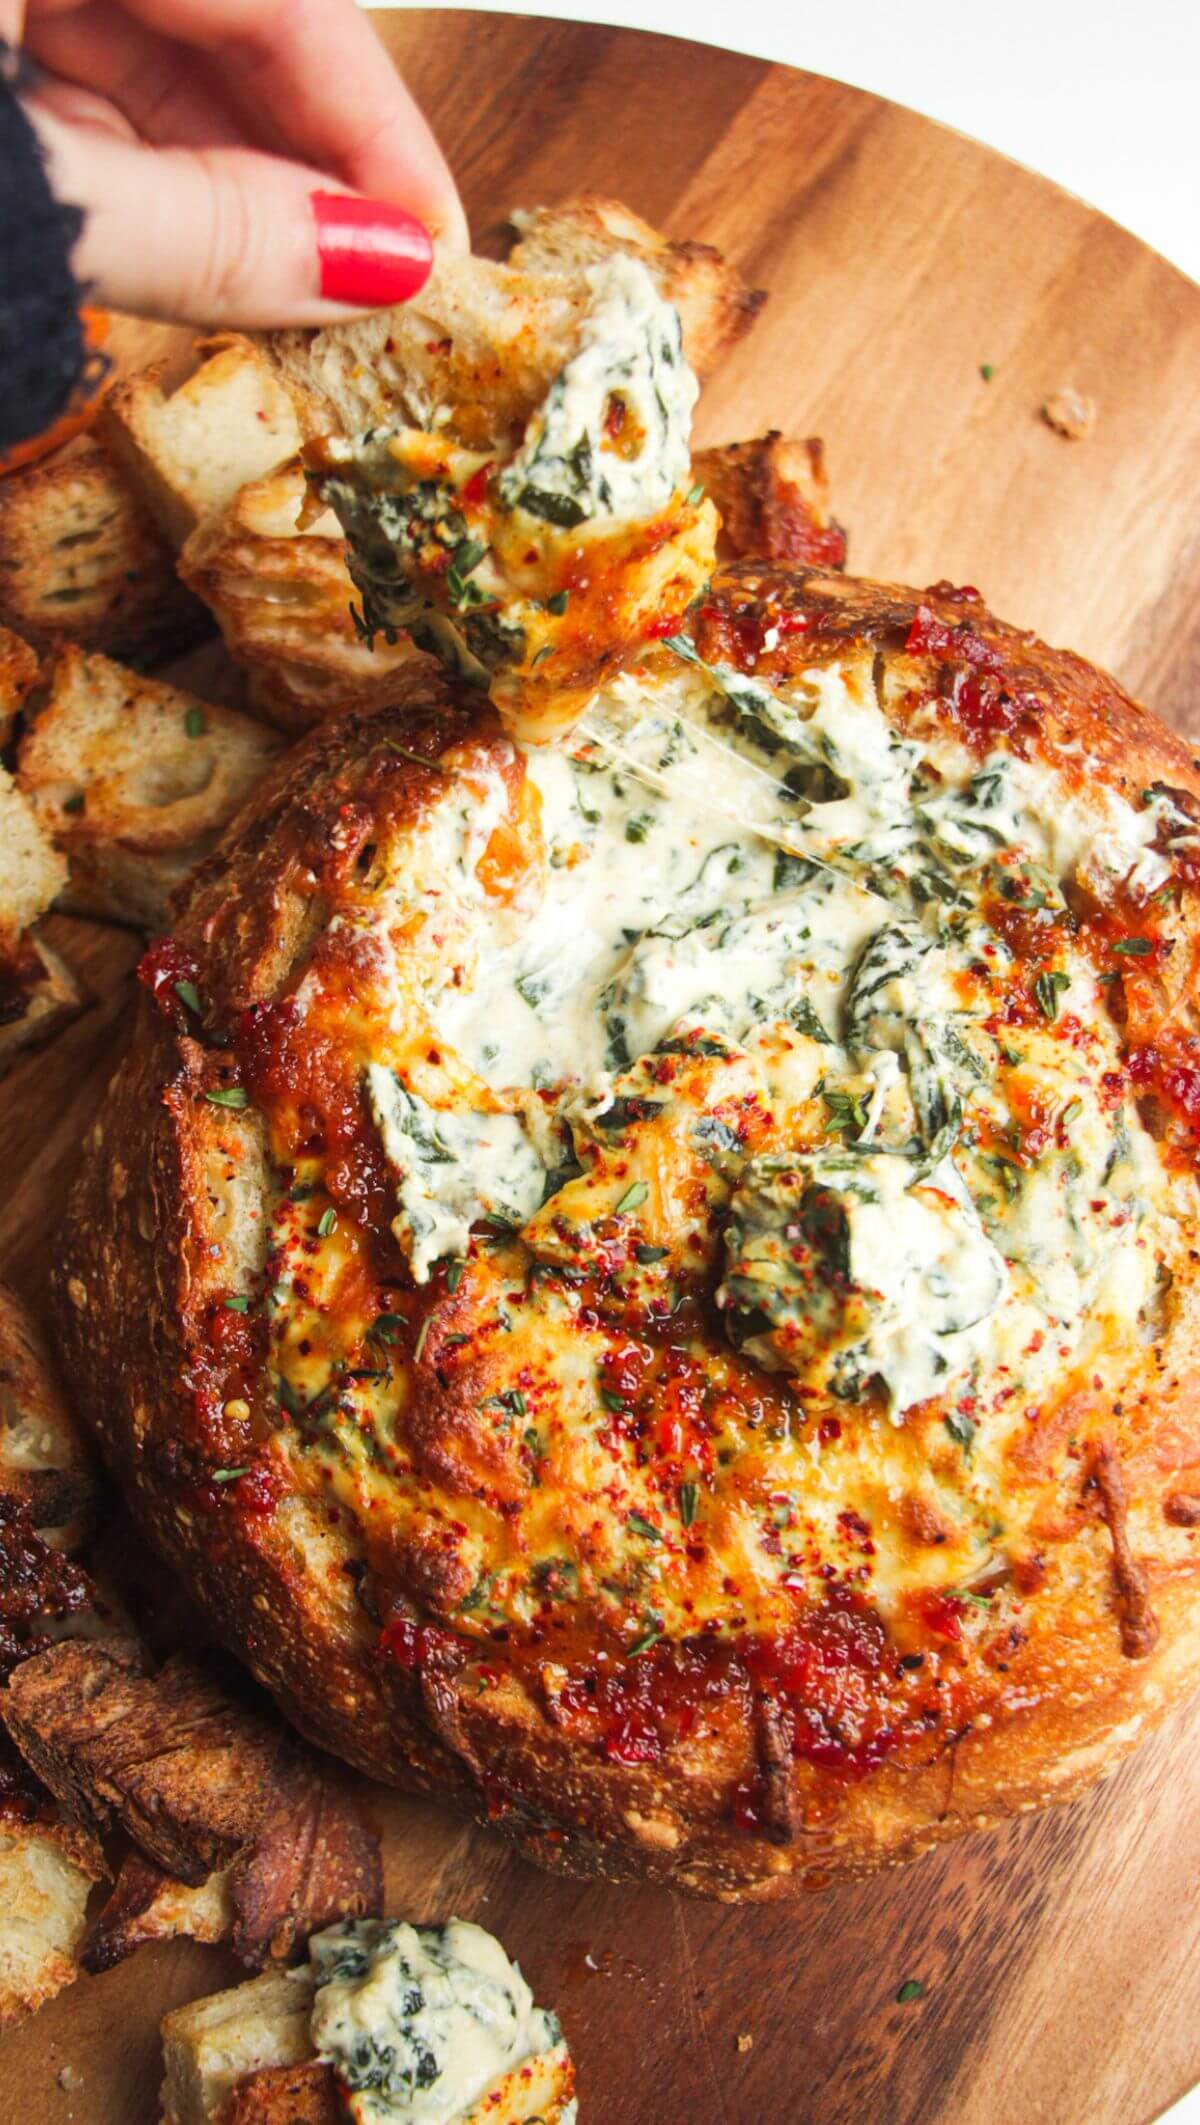 Cheesy Spinach Cob Loaf (Dip in a Bread Bowl)